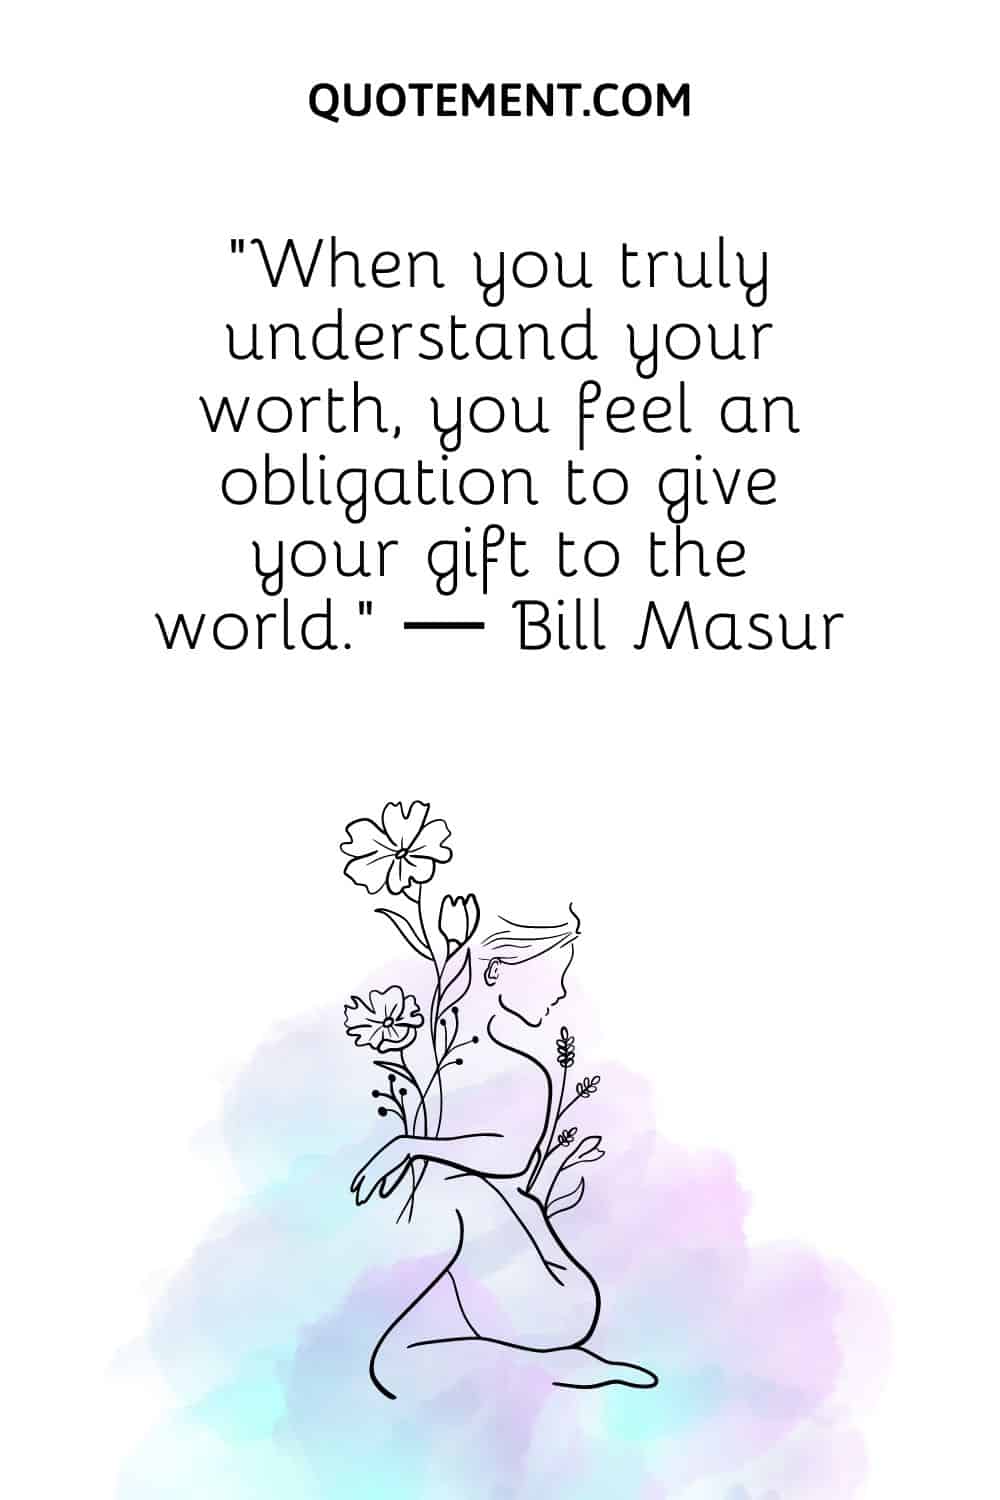 When you truly understand your worth, you feel an obligation to give your gift to the world